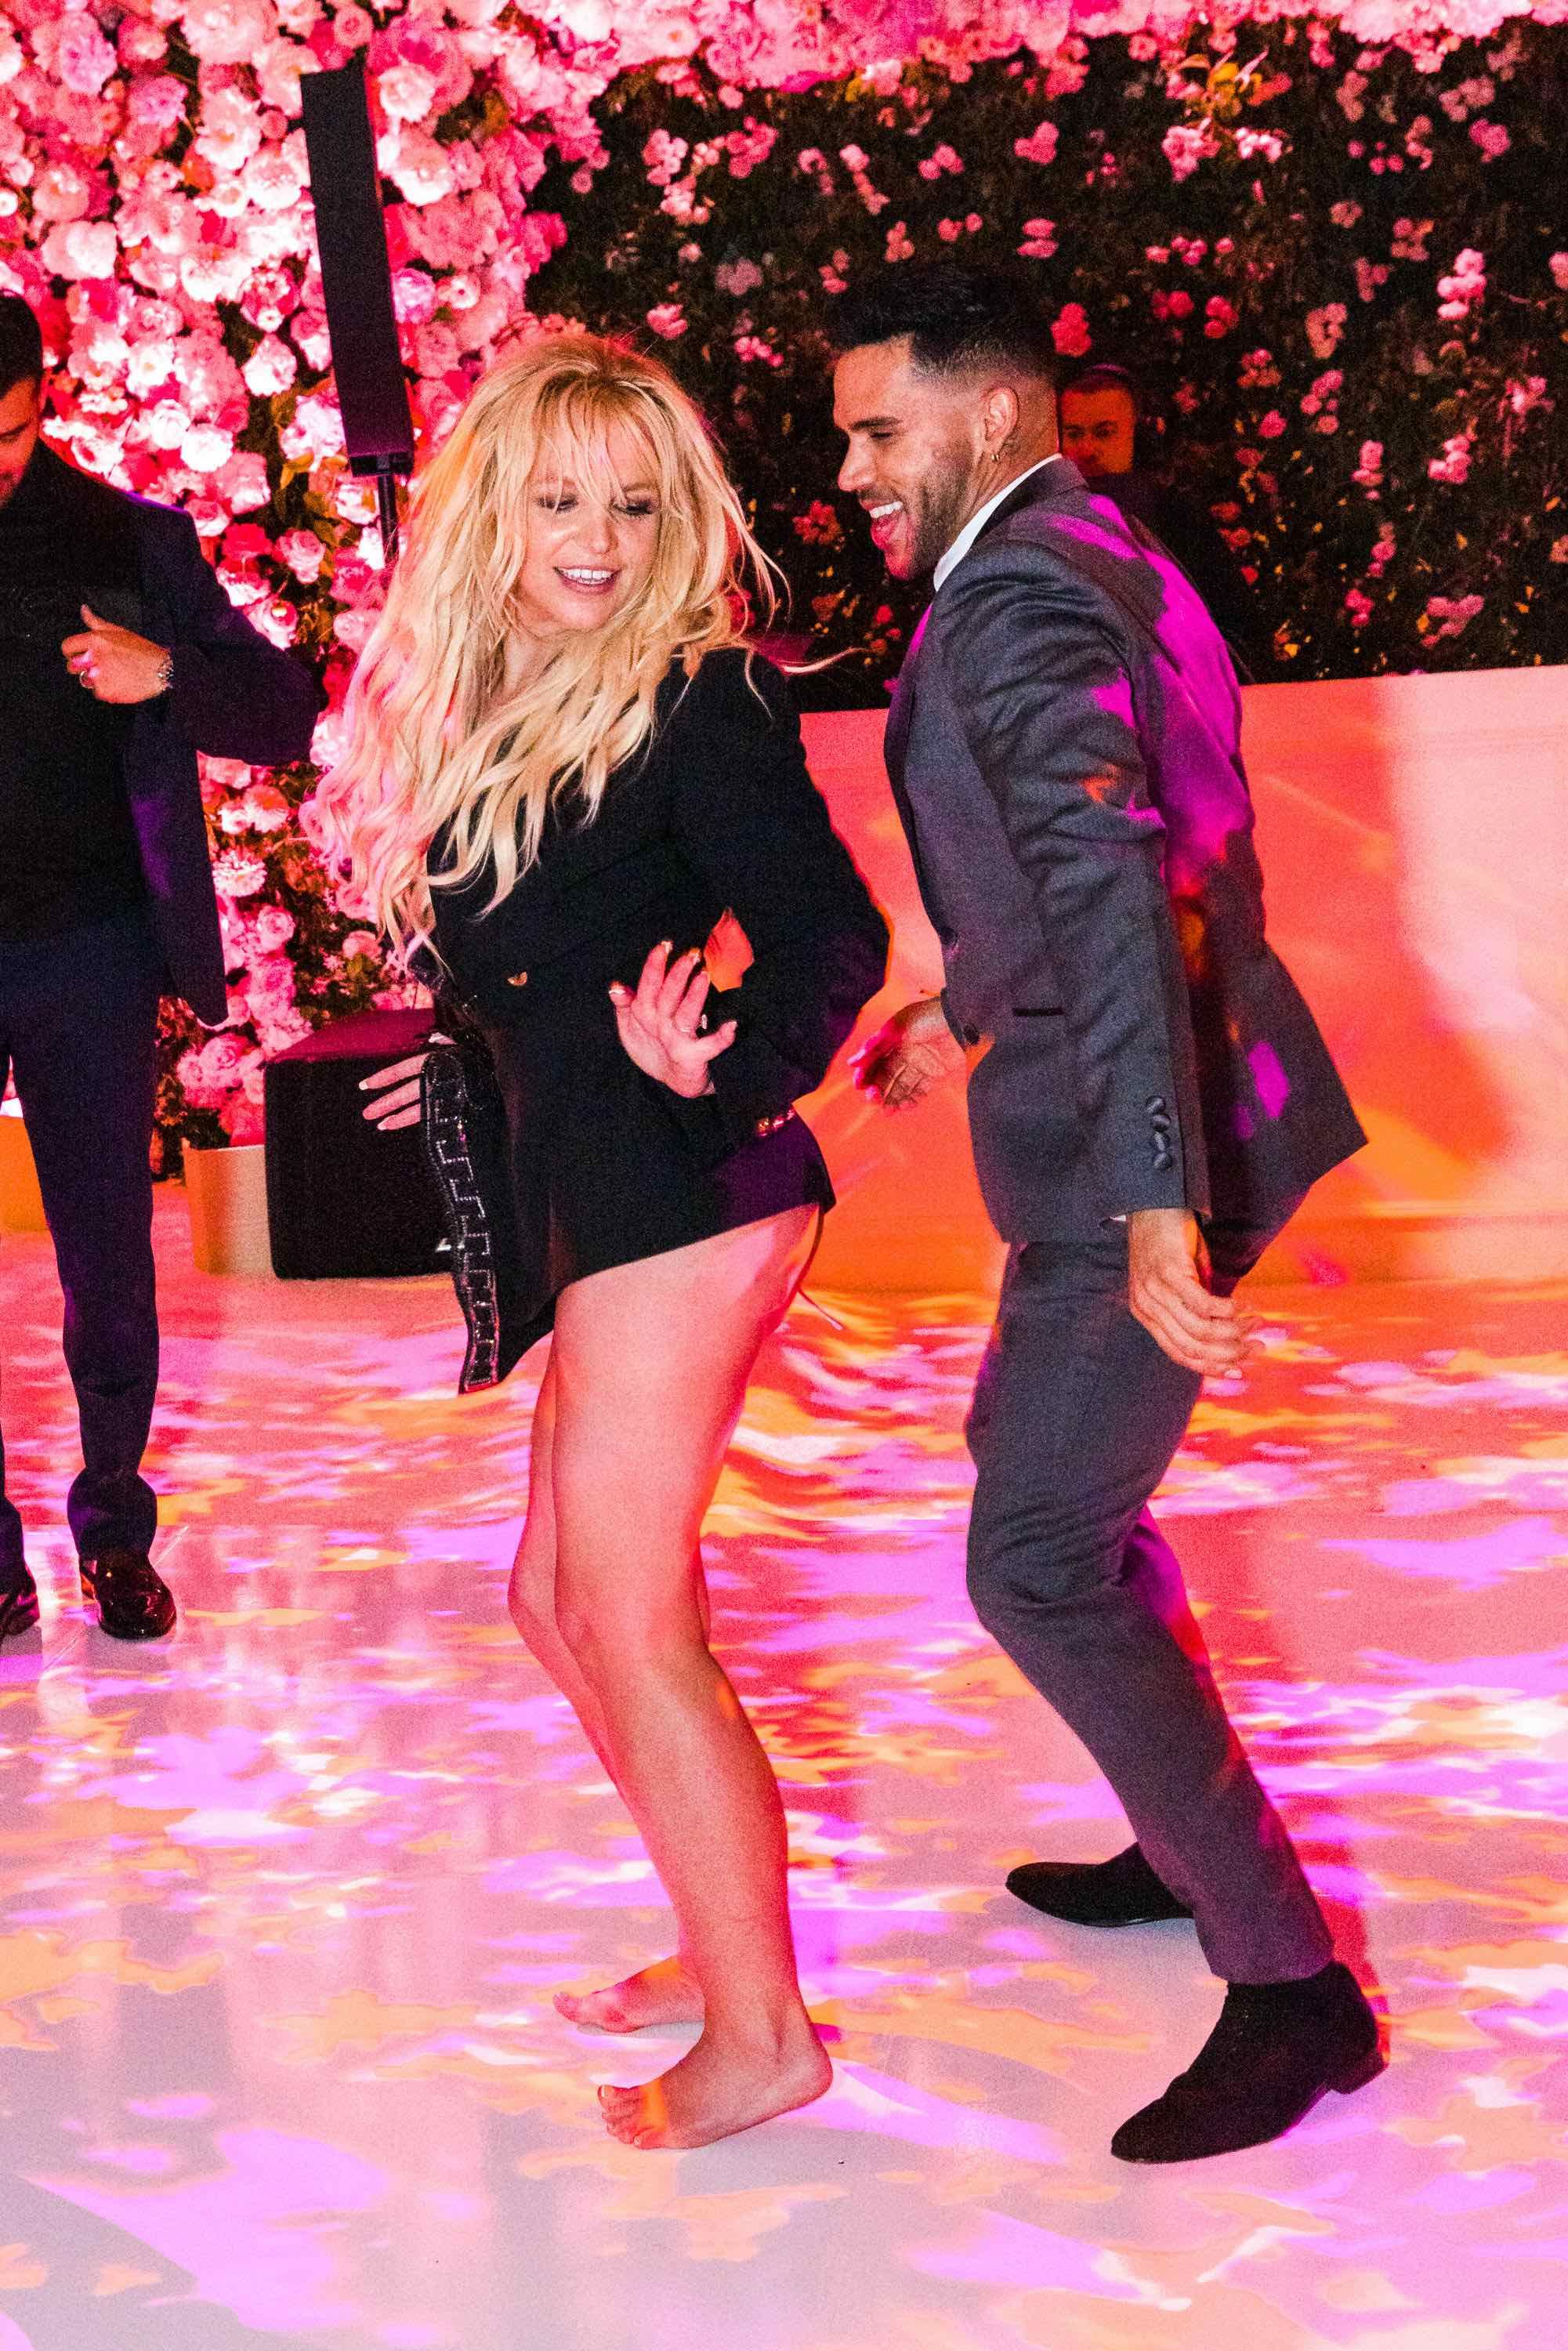 Britney Spears Upskirt Ass - Britney Spears Dances Pantless At Her Wedding In New Photos